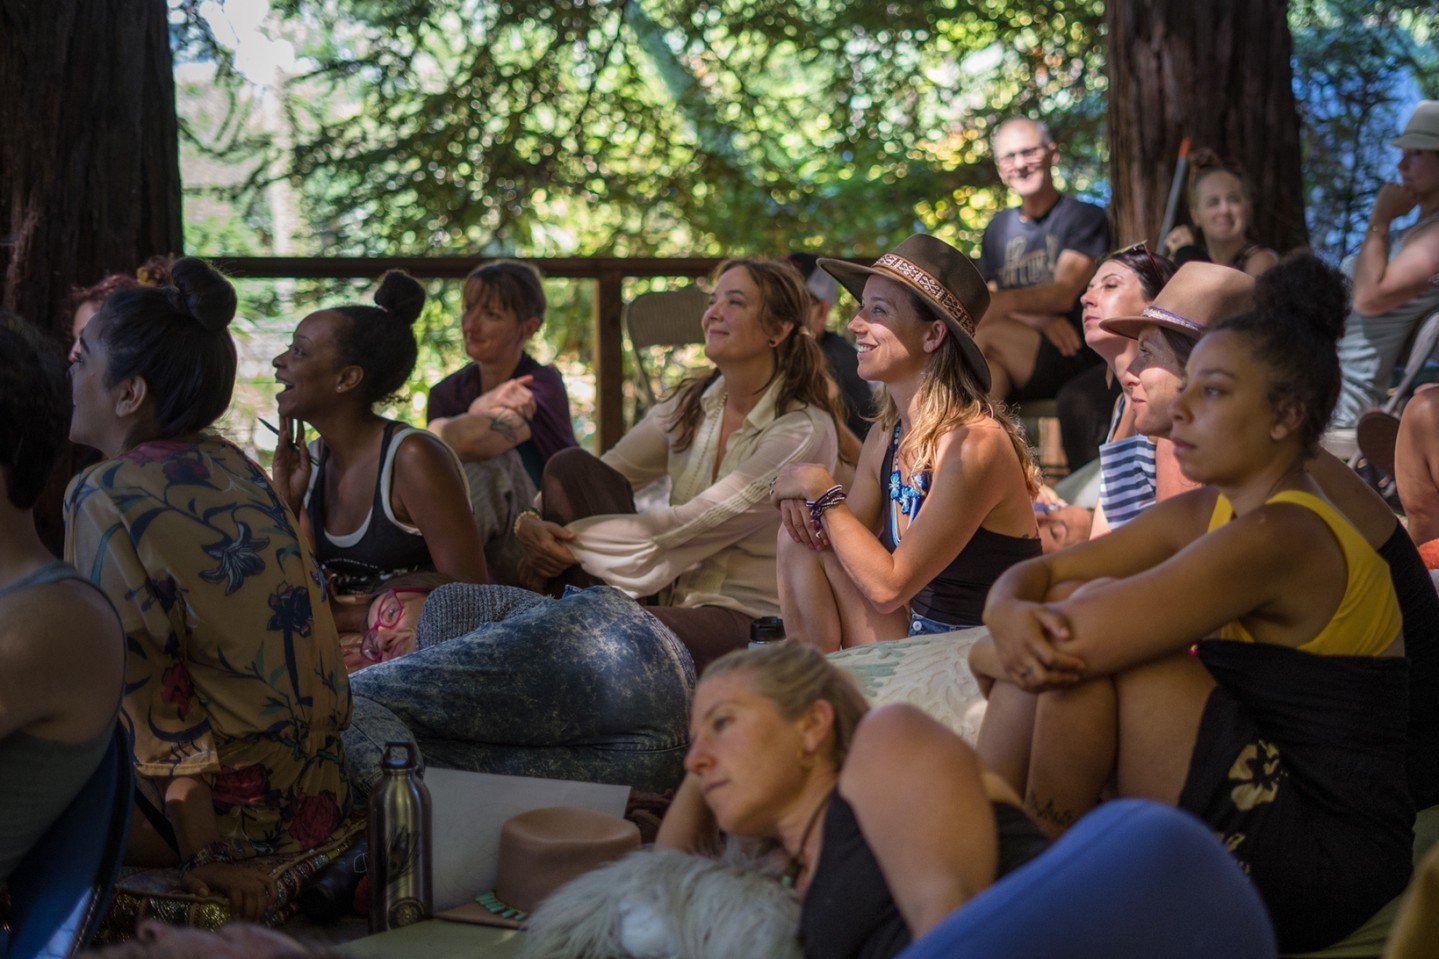 &quot;If we have no peace, it is because we have forgotten that we belong to each other.&quot;

Mother Teresa

Join us for a nature retreat dedicated to entirely to BELONGING in July in California. It's called &quot;Reflections 6.0.&quot; Link in bio